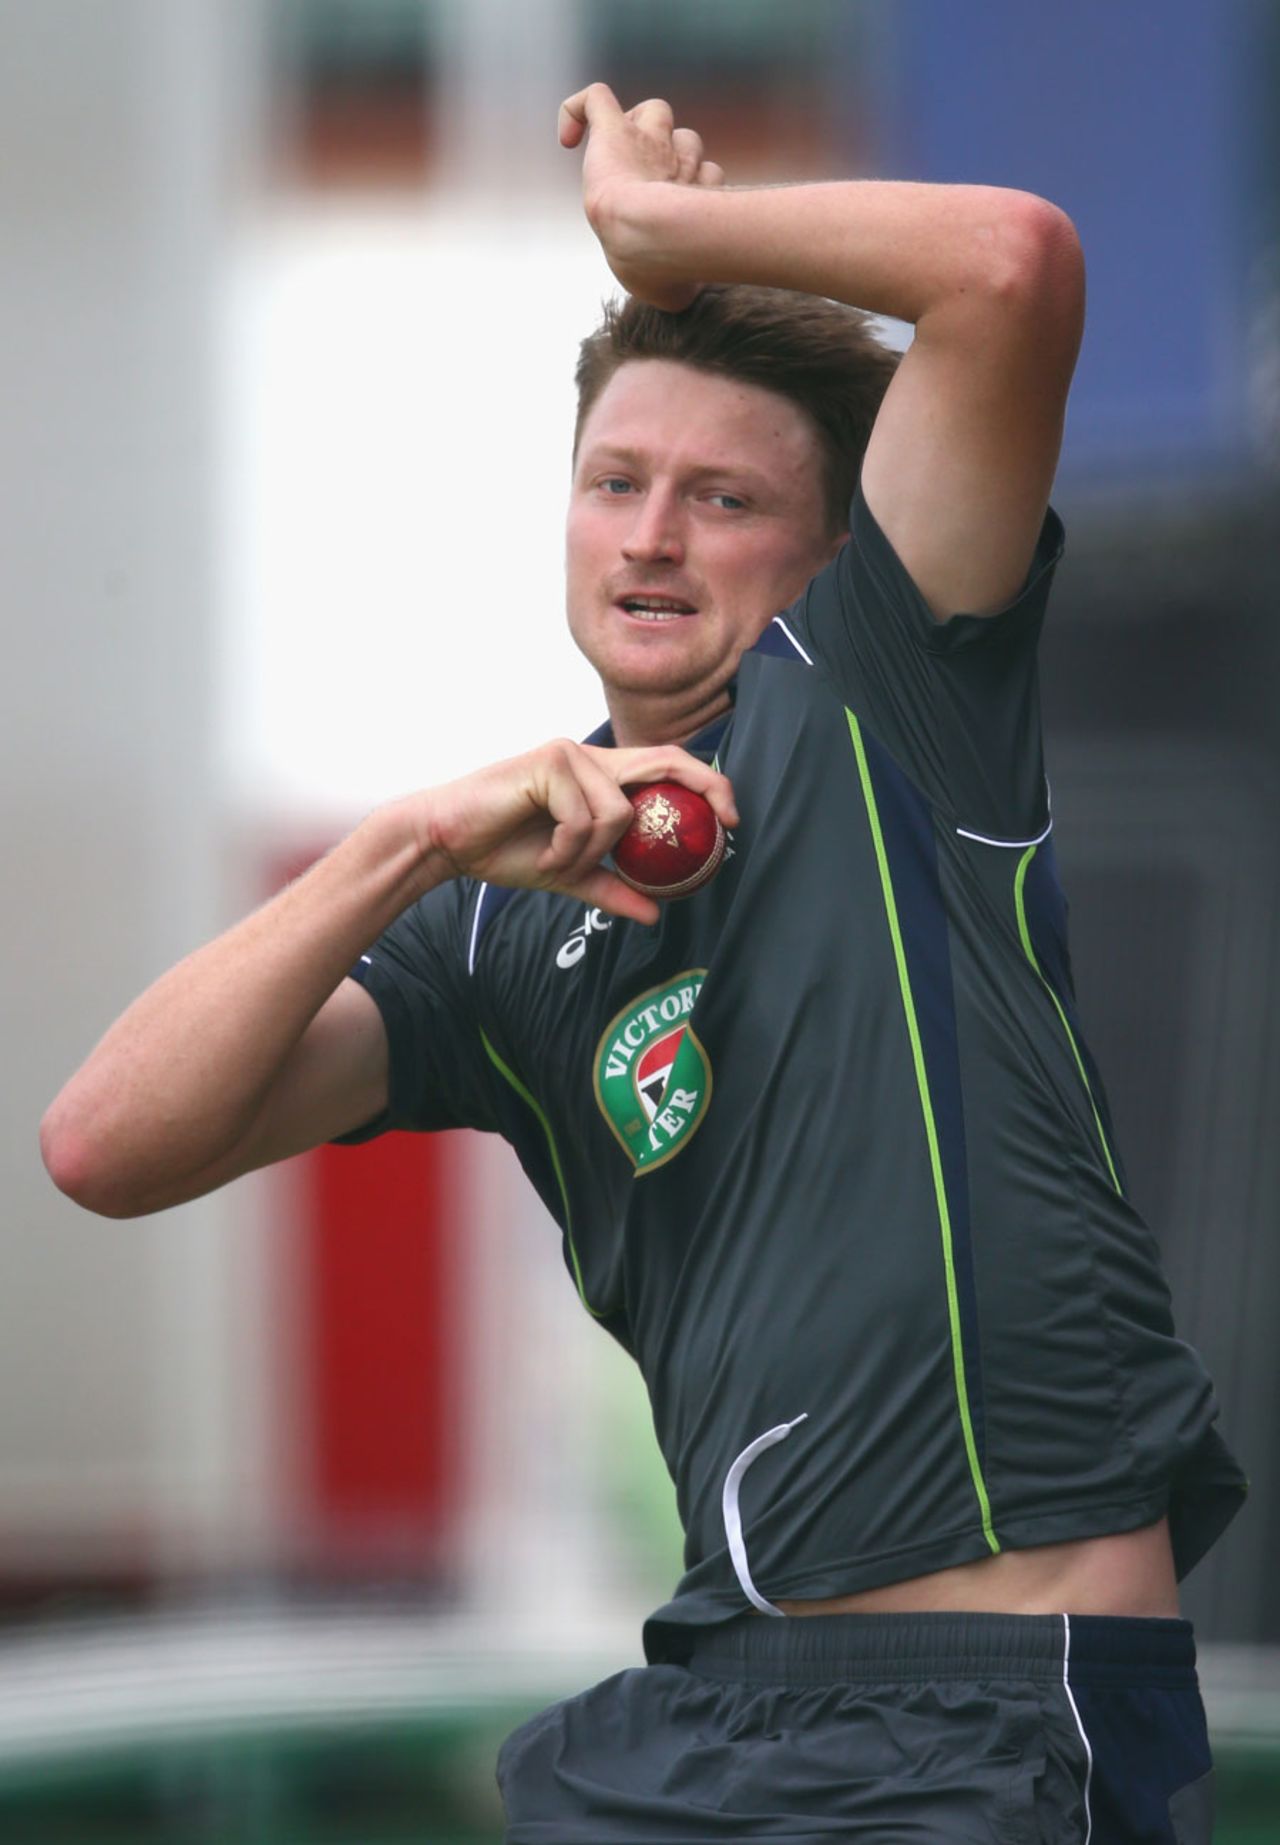 Jackson Bird bowls during a practice session, Old Trafford, Manchester, July 30, 2013